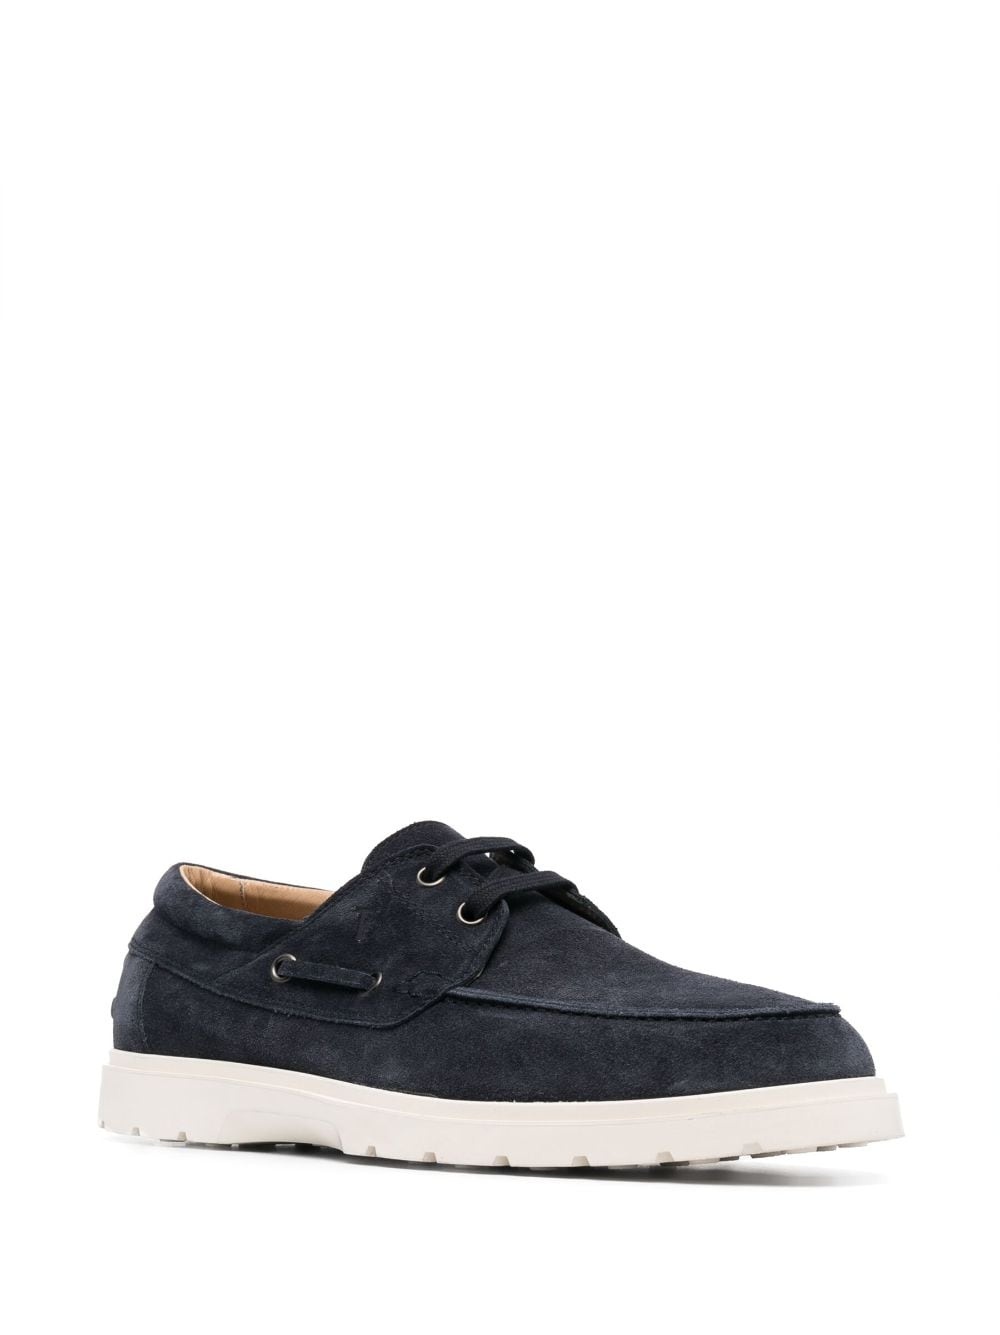 suede boat shoes - 2